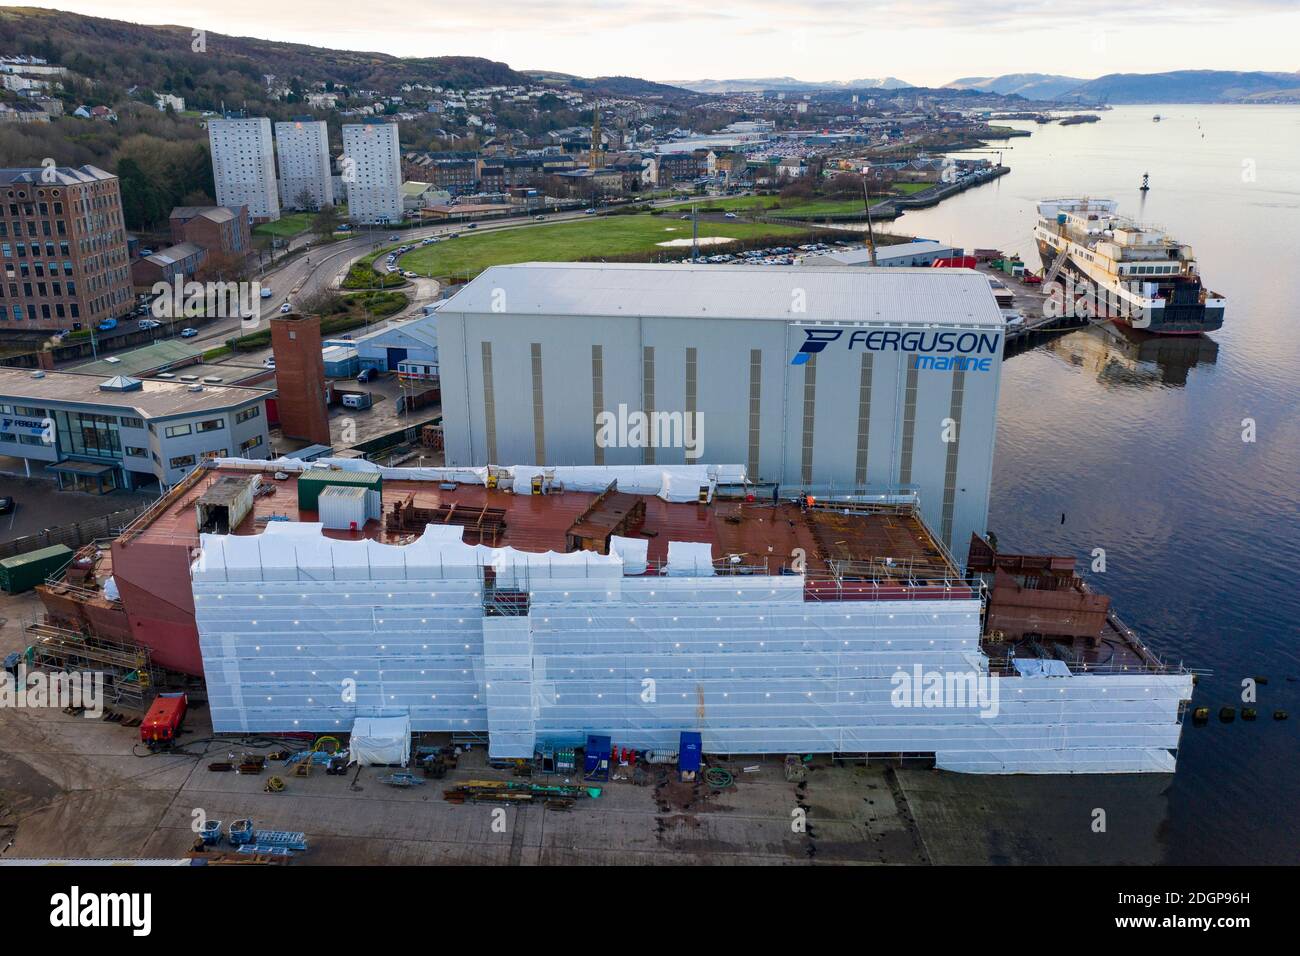 Port Glasgow, Scotland, UK. 9 December 2020. Aerial view of CalMac ferry MV Glen Sannox and Hull 802 ( unnamed second ferry) under fabrication at Ferguson Marine shipyard in Port Glasgow. The Scottish Parliament's Rural Economy and Connectivity Committee publish damning report criticising all aspects of the over budget and overdue project. Iain Masterton/Alamy Live News Stock Photo